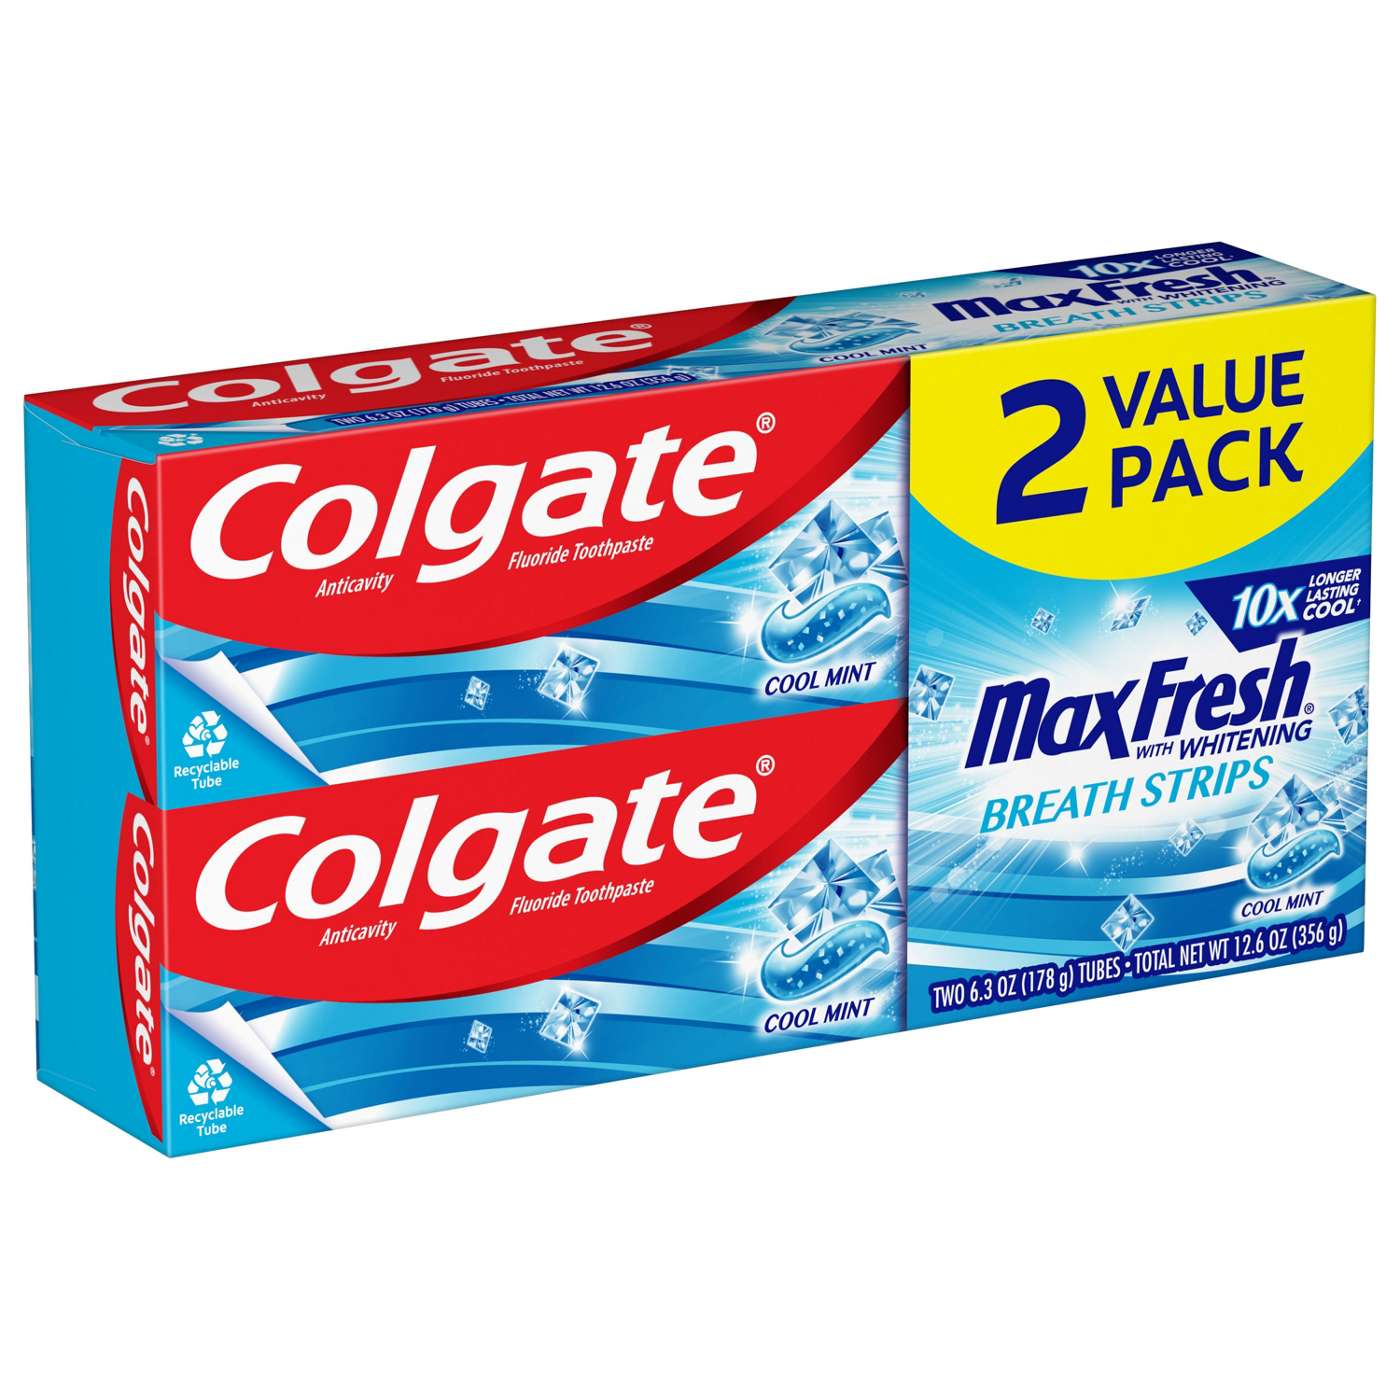 Colgate Max Fresh Anticavity Toothpaste 2 pk - Cool Mint; image 8 of 14